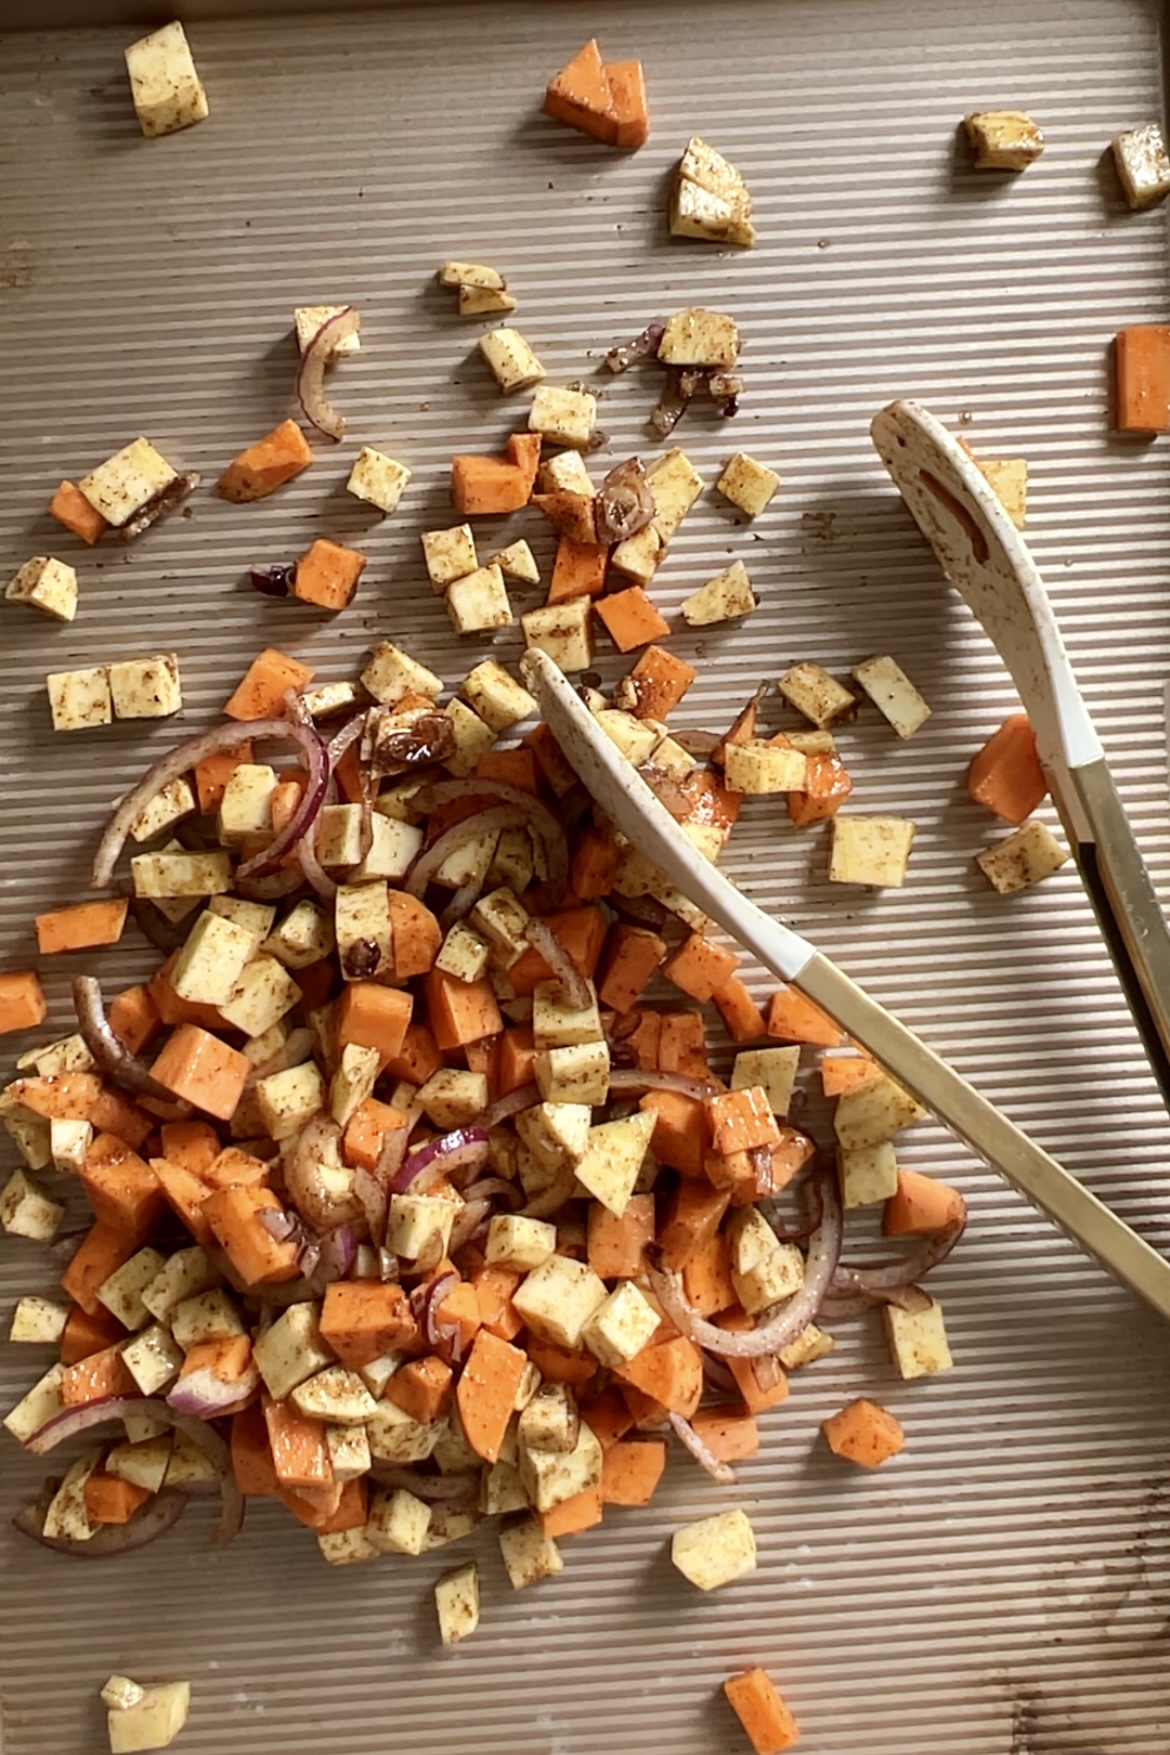 A baking sheet holds a healthy mixture of diced sweet potatoes, tofu cubes, and sliced onions. The ingredients are seasoned and spread out unevenly. Two white tongs are placed beside the mixture, lying across the baking sheet with ridges running horizontally—perfect for taco fillings.